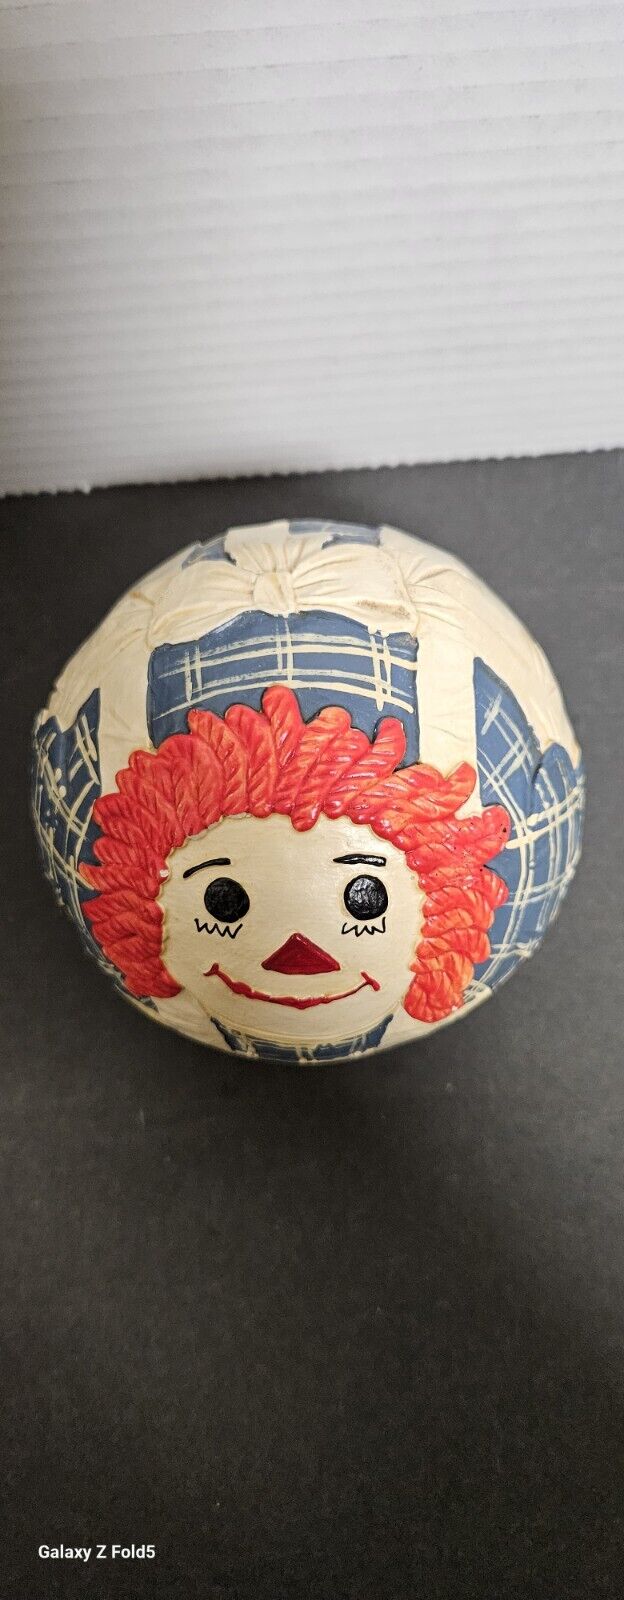 Briere Folk Art Signed. Raggedy Ann Ball No Cart. Excellent Condition. 